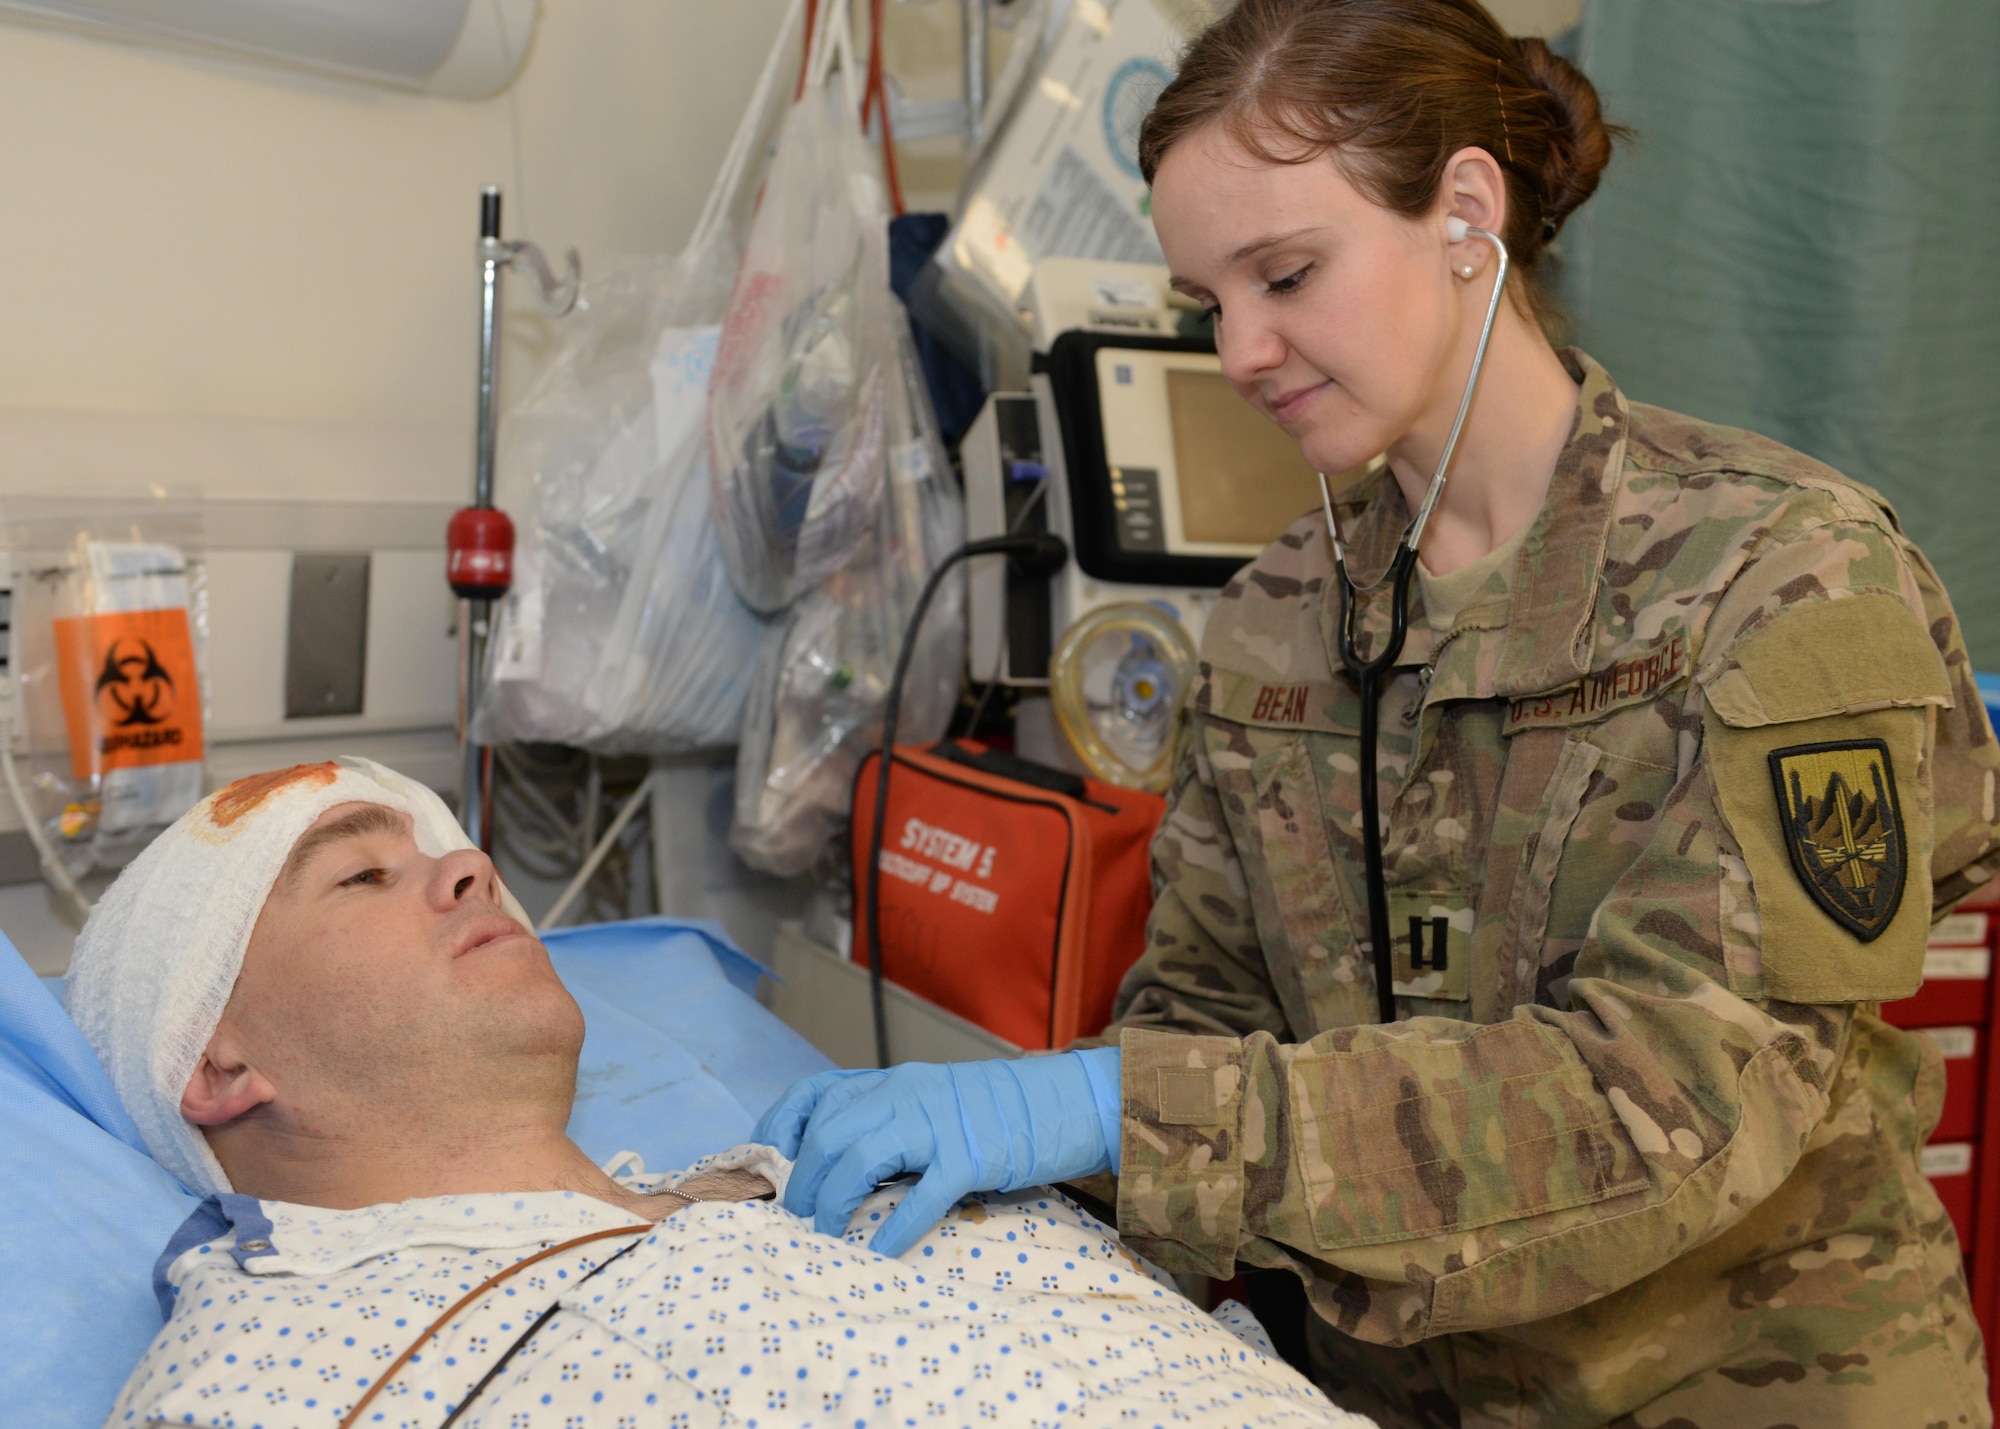 U.S. Air Force Capt. Mavis Bean, 455th Expeditionary Medical Operations Squadron clinical nurse, checks vital signs on a volunteer training patient June 11, 2015, at Bagram Airfield Afghanistan. Bean works in the intensive care unit at Afghanistan’s most advanced medical facility, the Craig Joint Theater Hospital, and is responsible for treating trauma patients. (U.S. Air Force photo by Senior Airmen Cierra Presentado/Released)